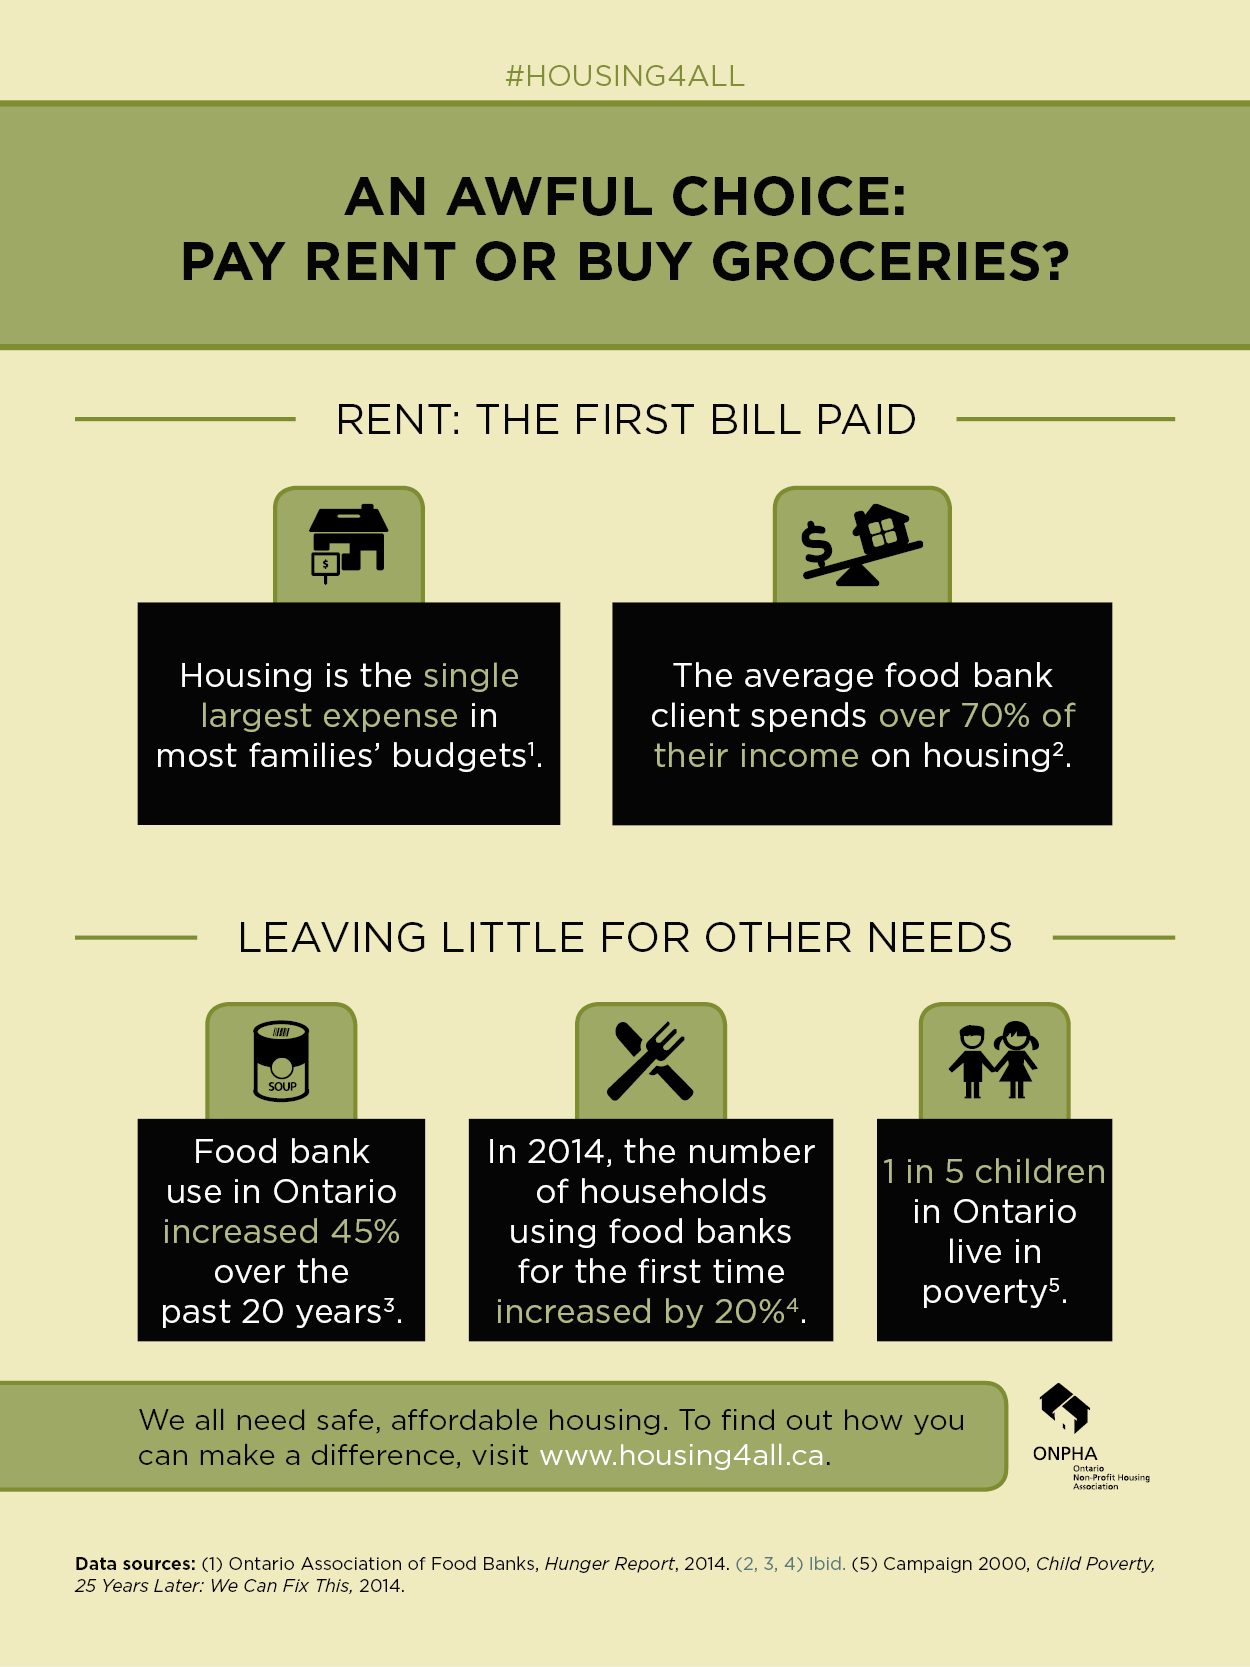 Infographic by ONPHA - An Awful Choice: Paying Rent or Buying Groceries